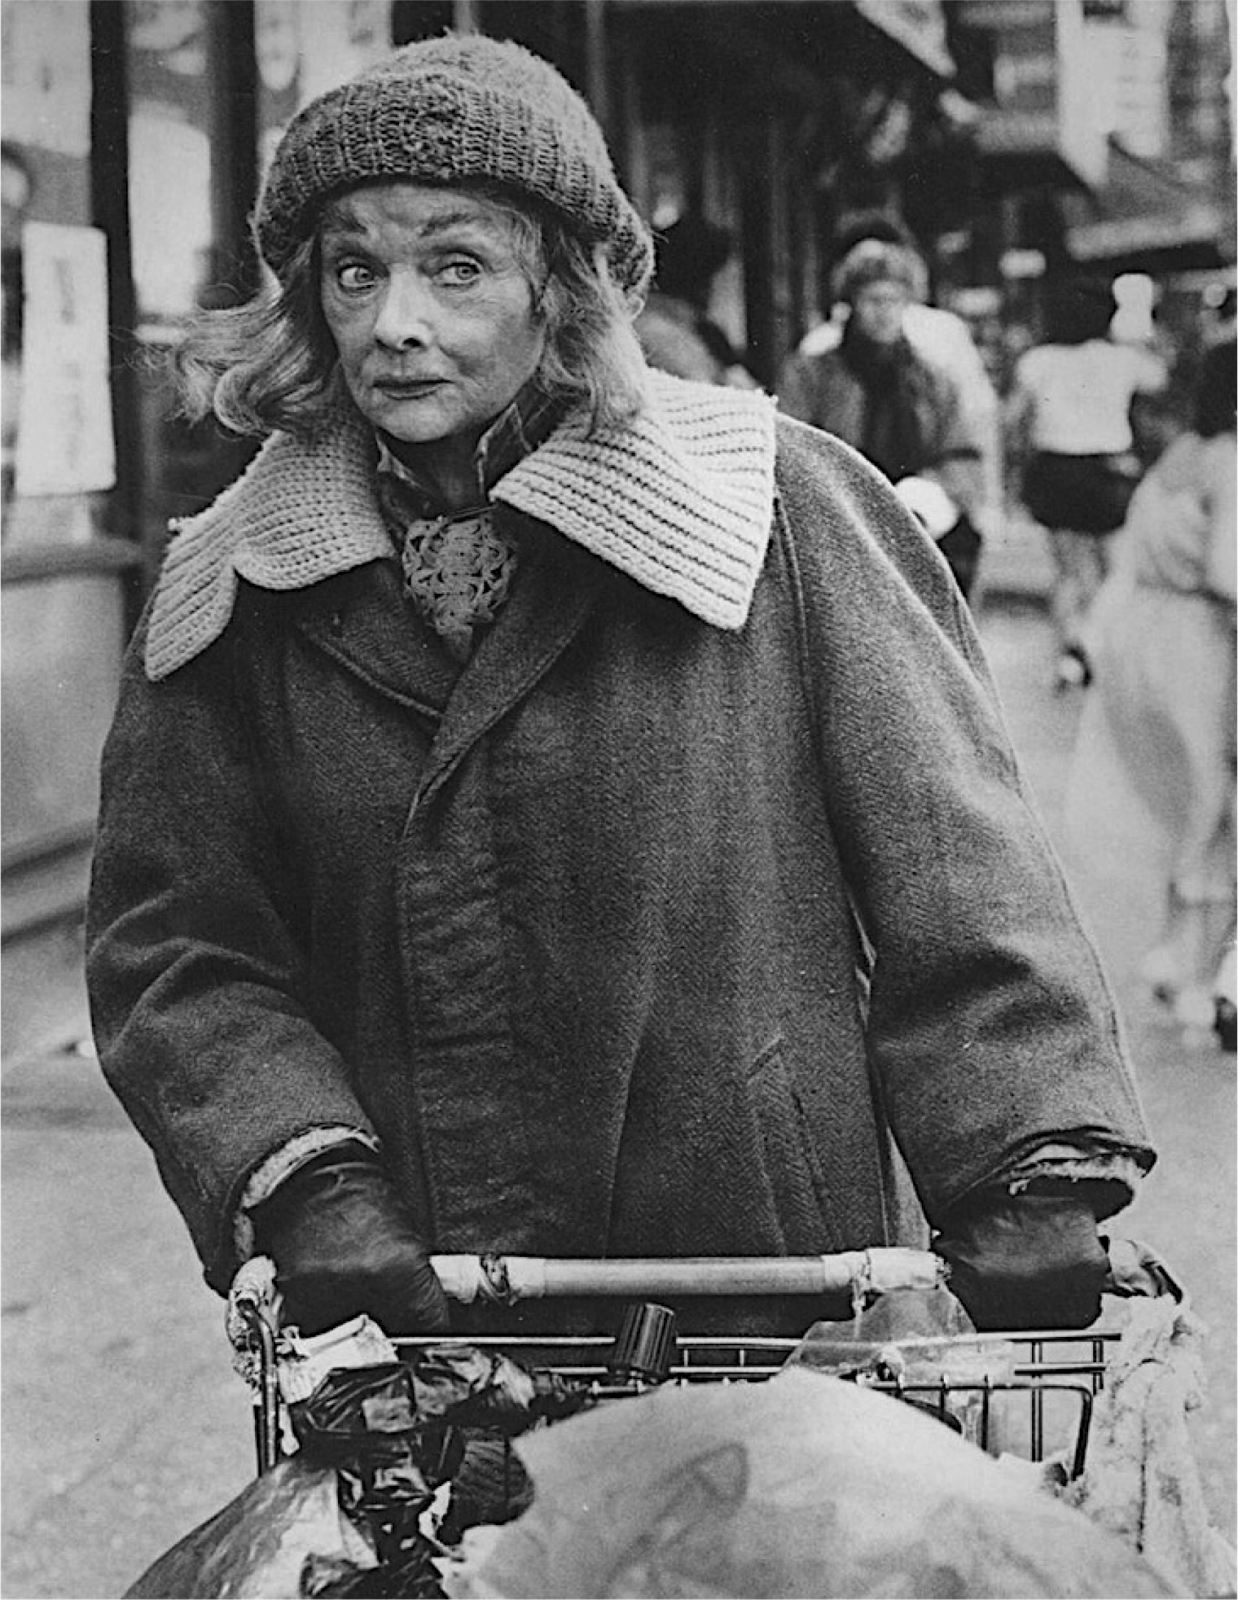 bag lady - Google Search | new ideas for paintings | Pinterest ...